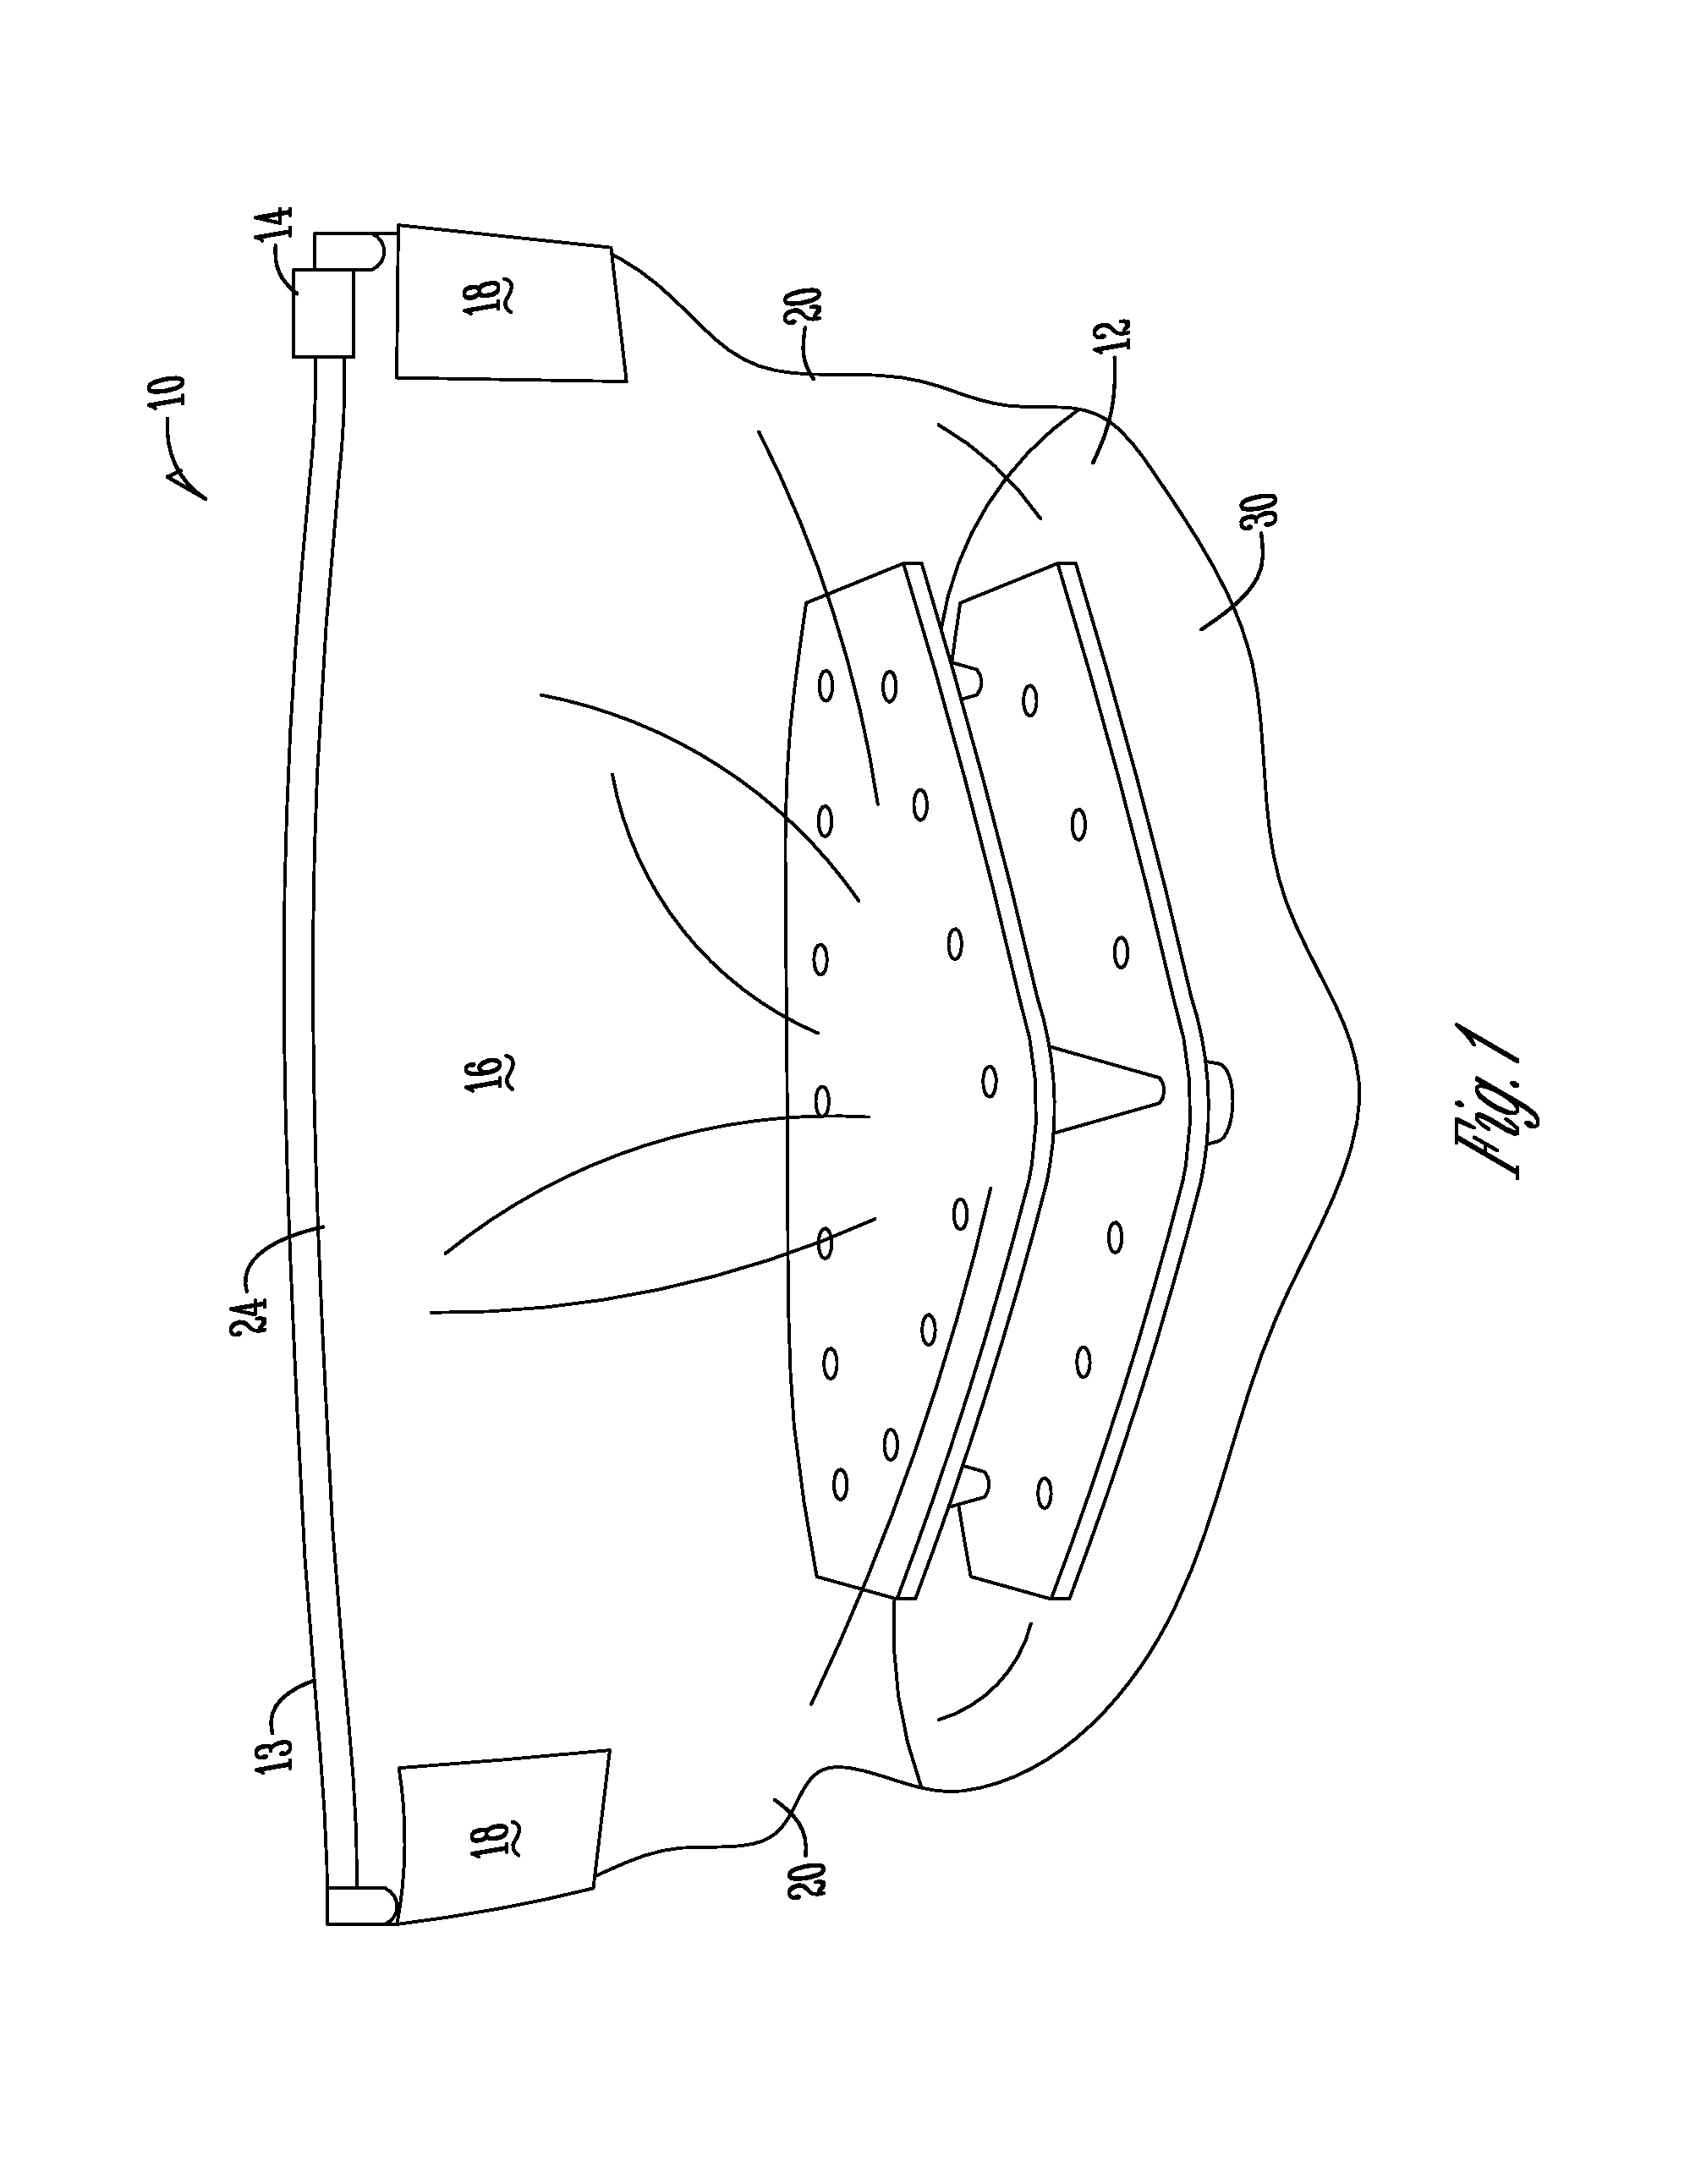 Method and apparatus for cooking foods